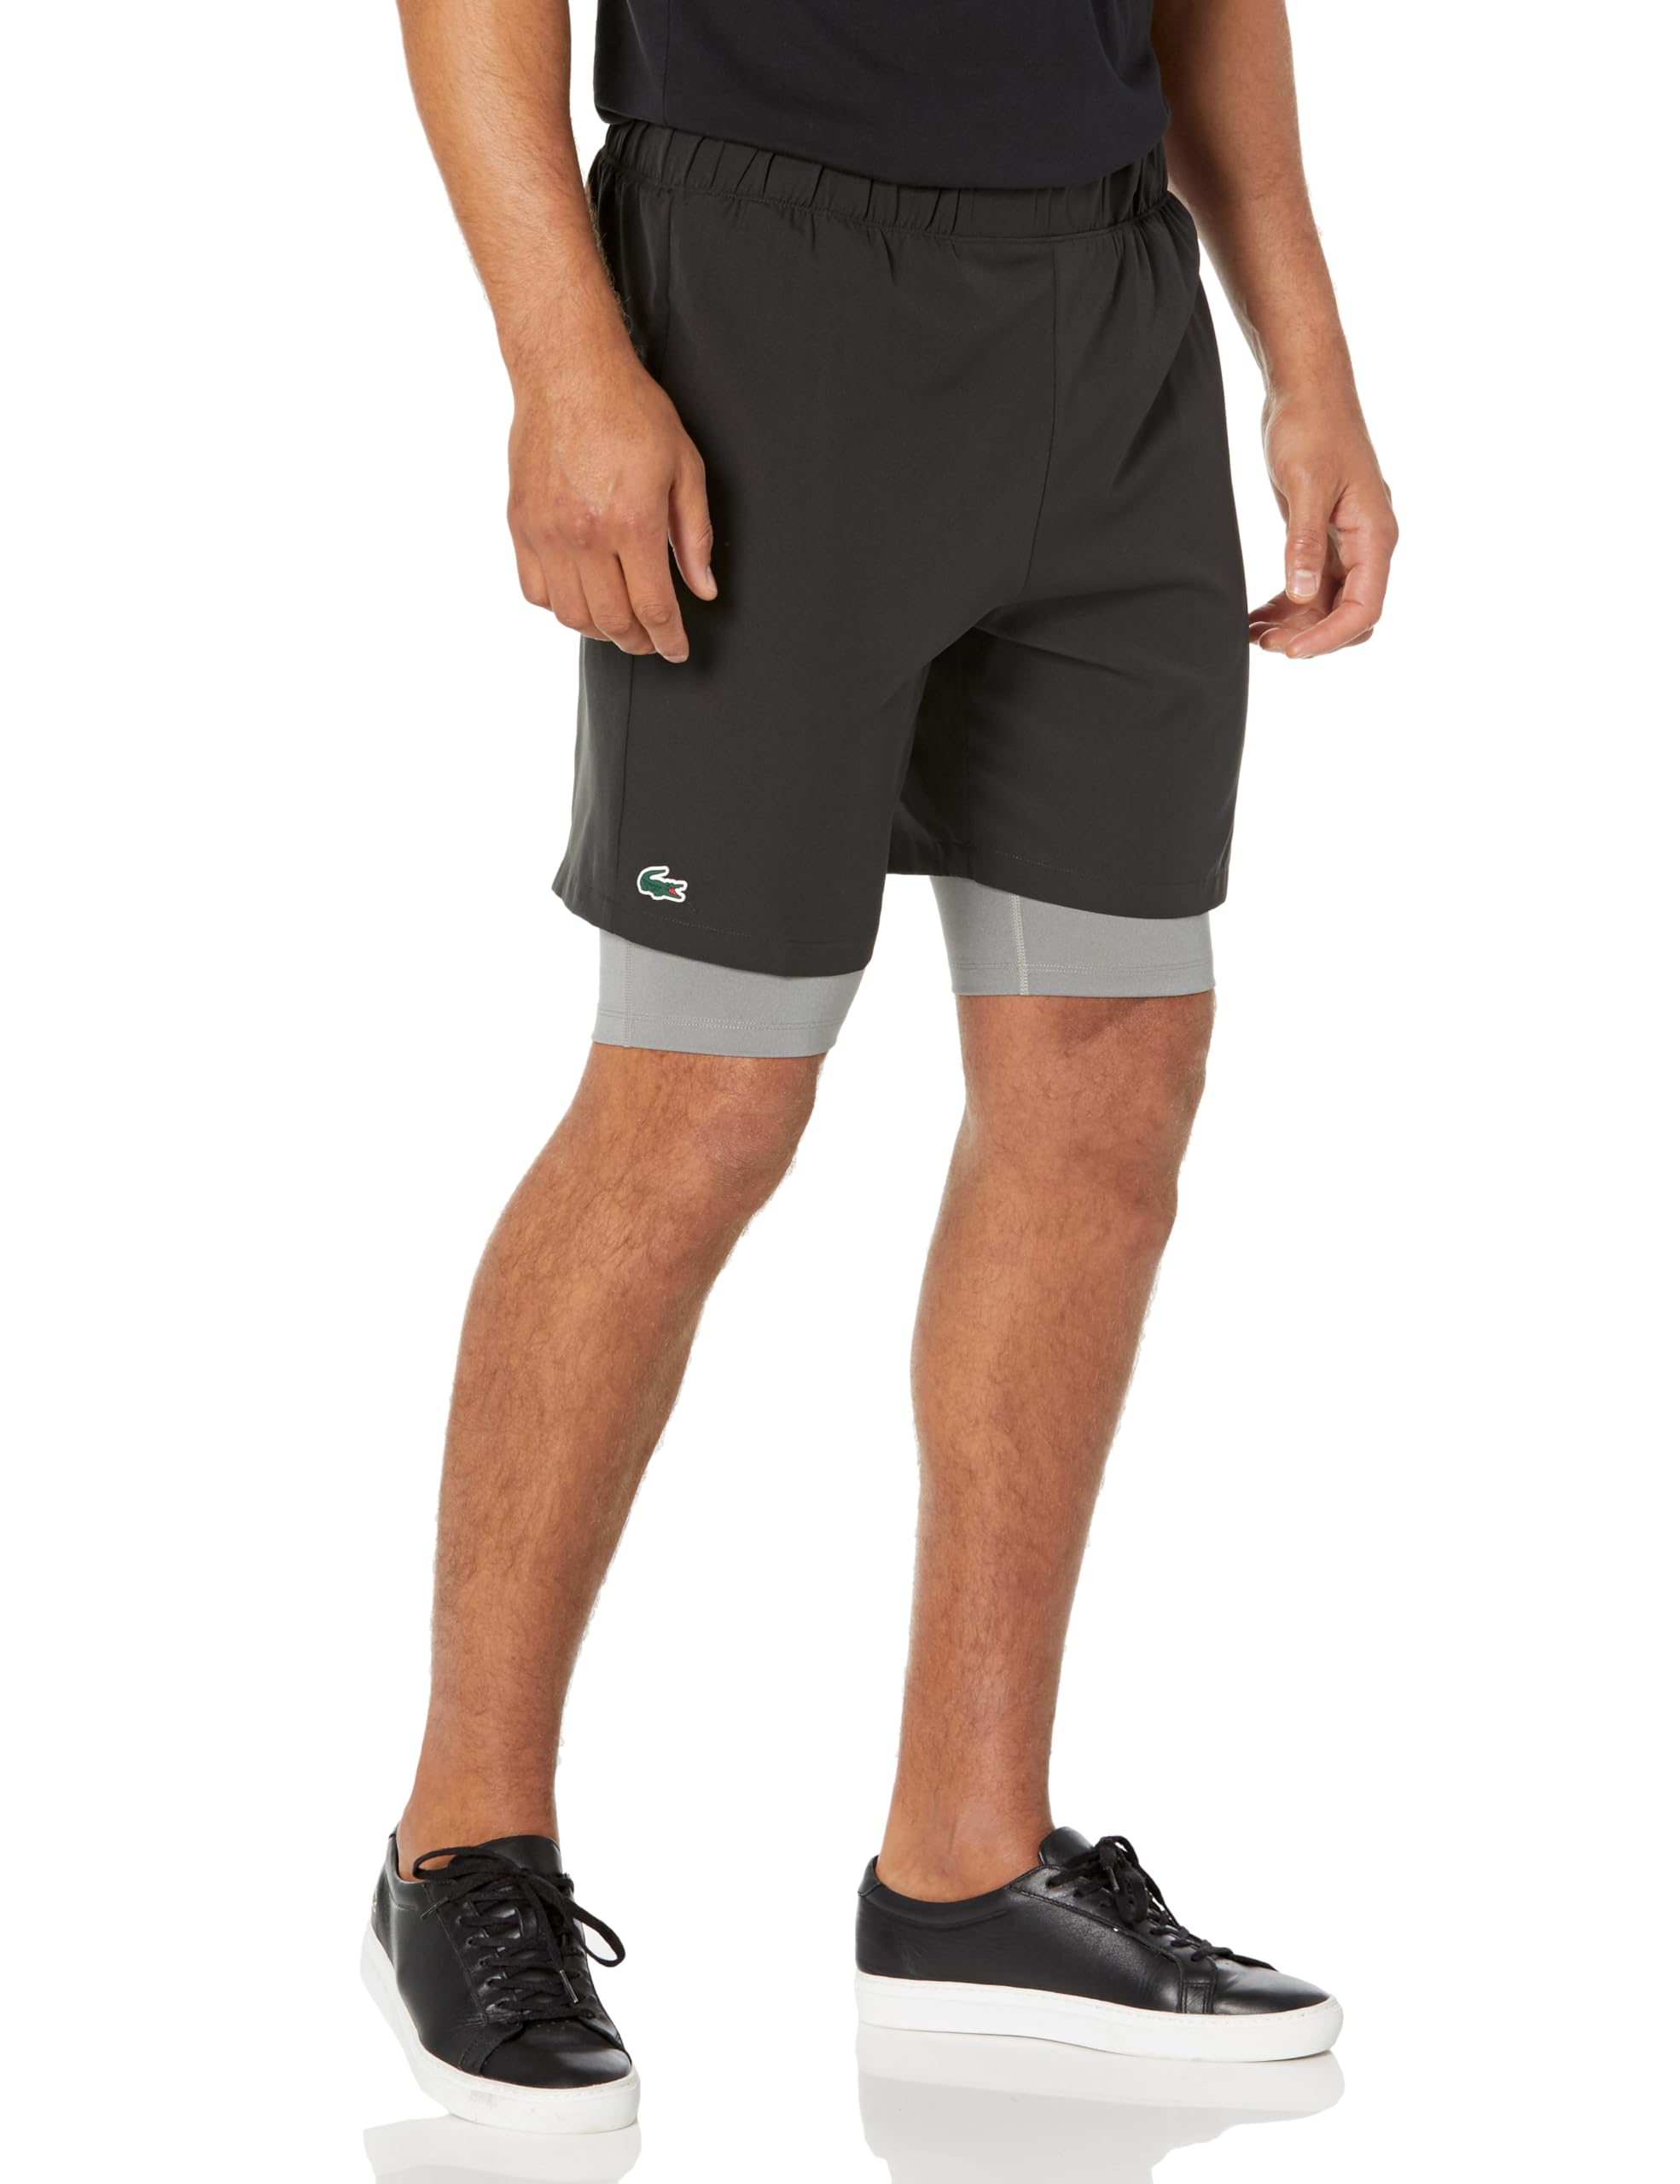 Lacoste Mens Two-Tone Sport Shorts with Built-in Undershorts NoirAgate Chine XX-Large